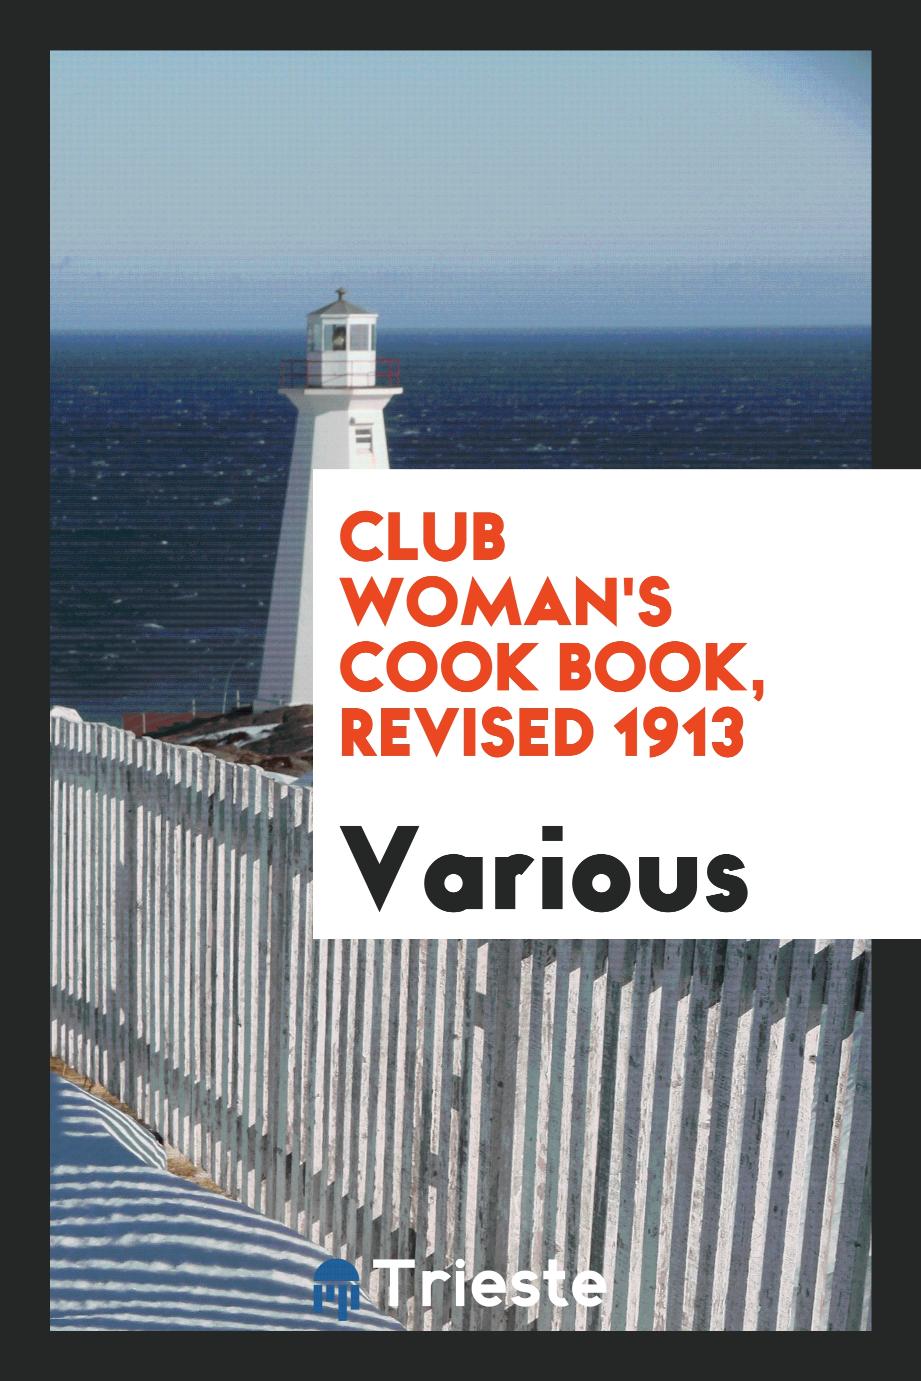 Club woman's cook book, revised 1913